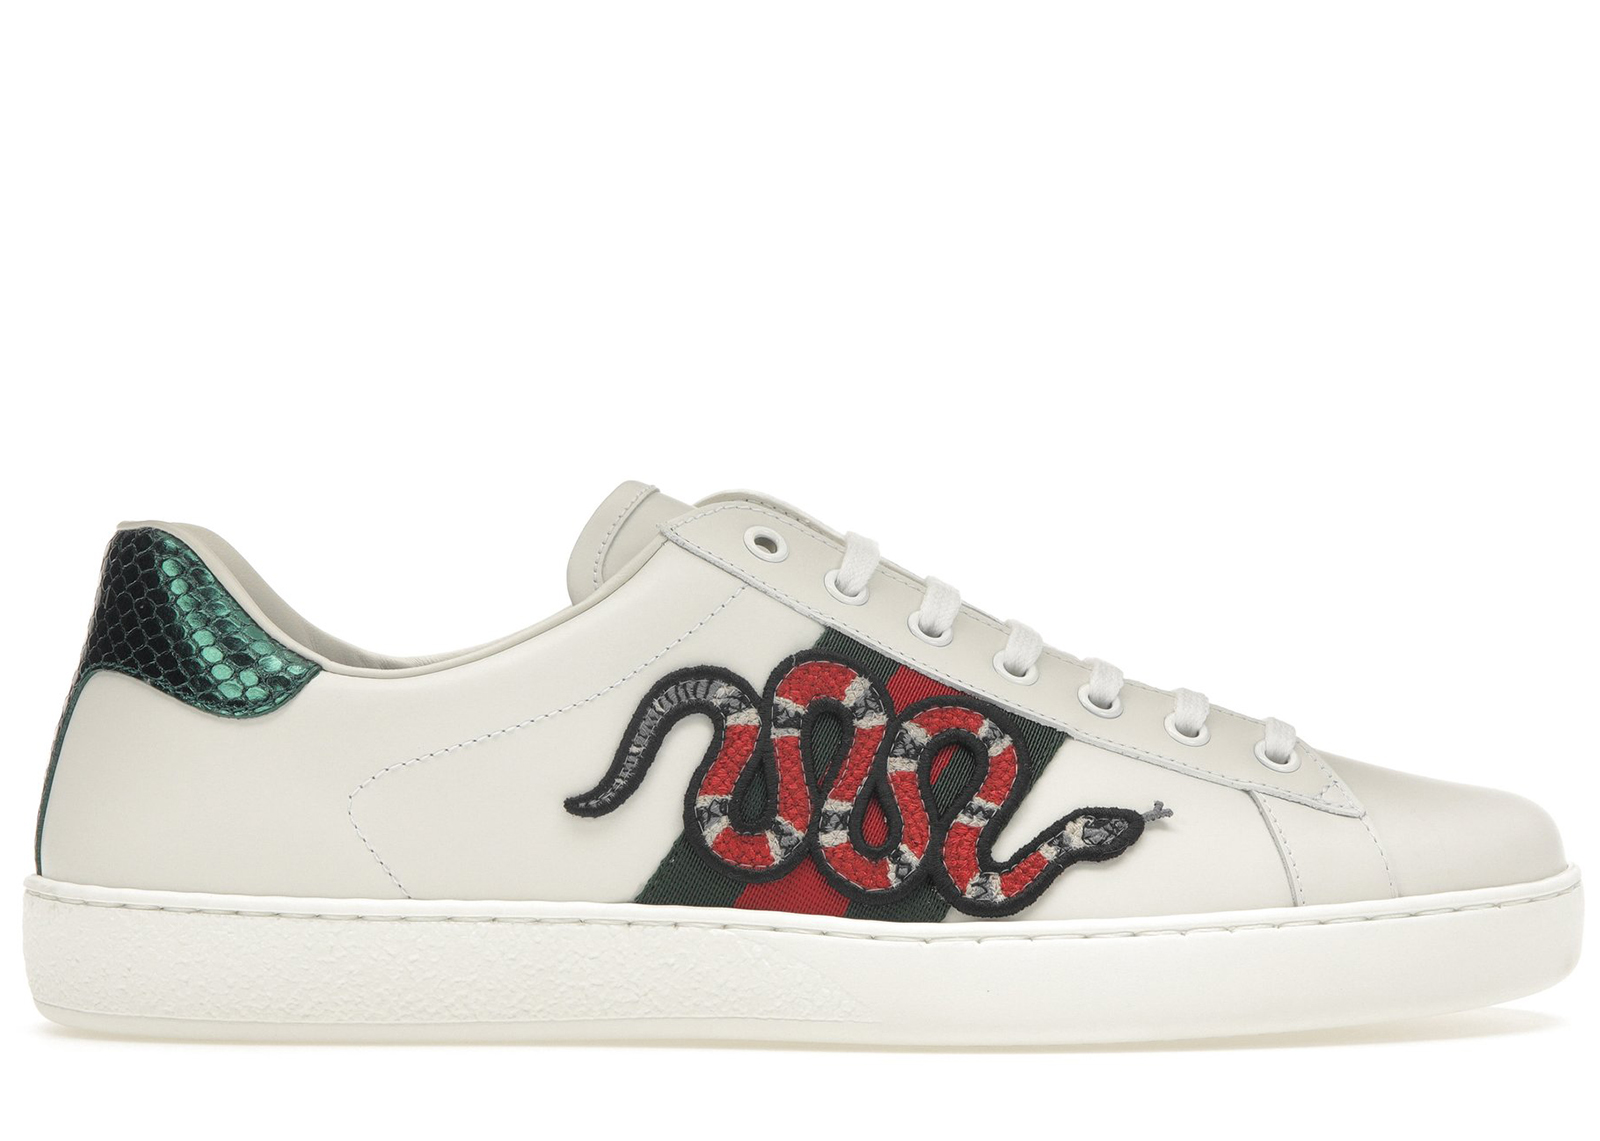 Gucci Ace Embroidered Snake - 456230 